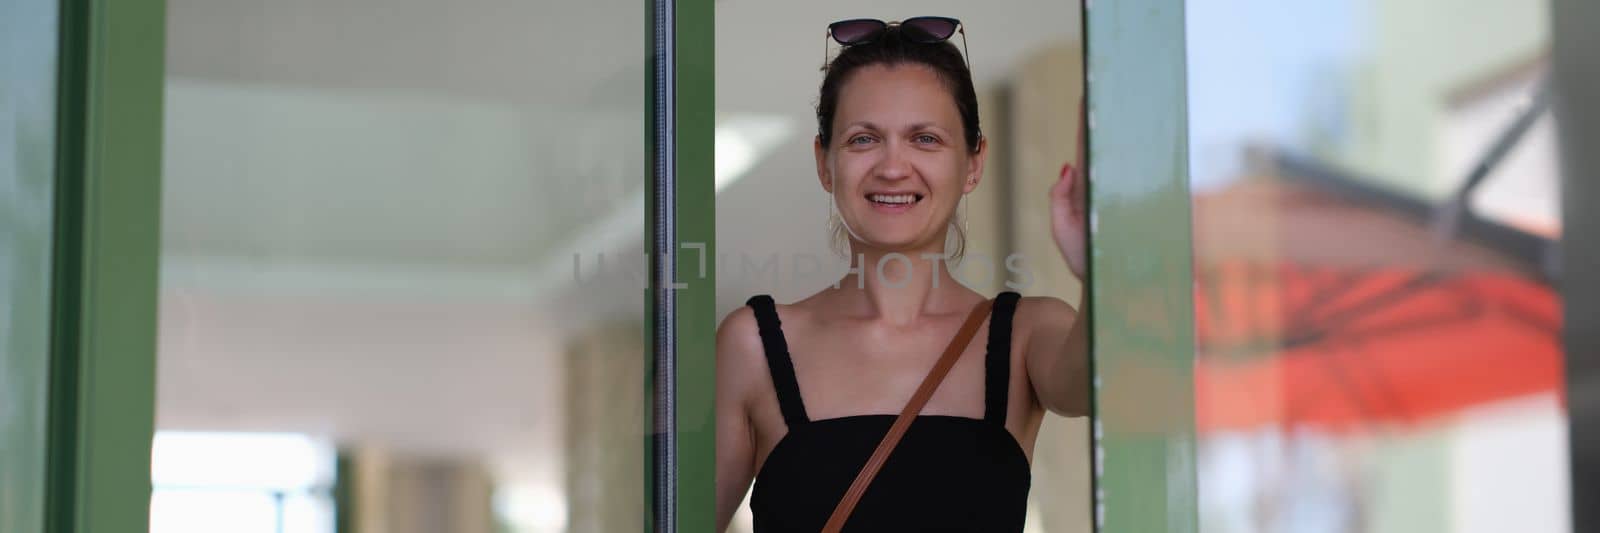 Beautiful smiling young woman opens glass door. Satisfied customer or meeting guests concept